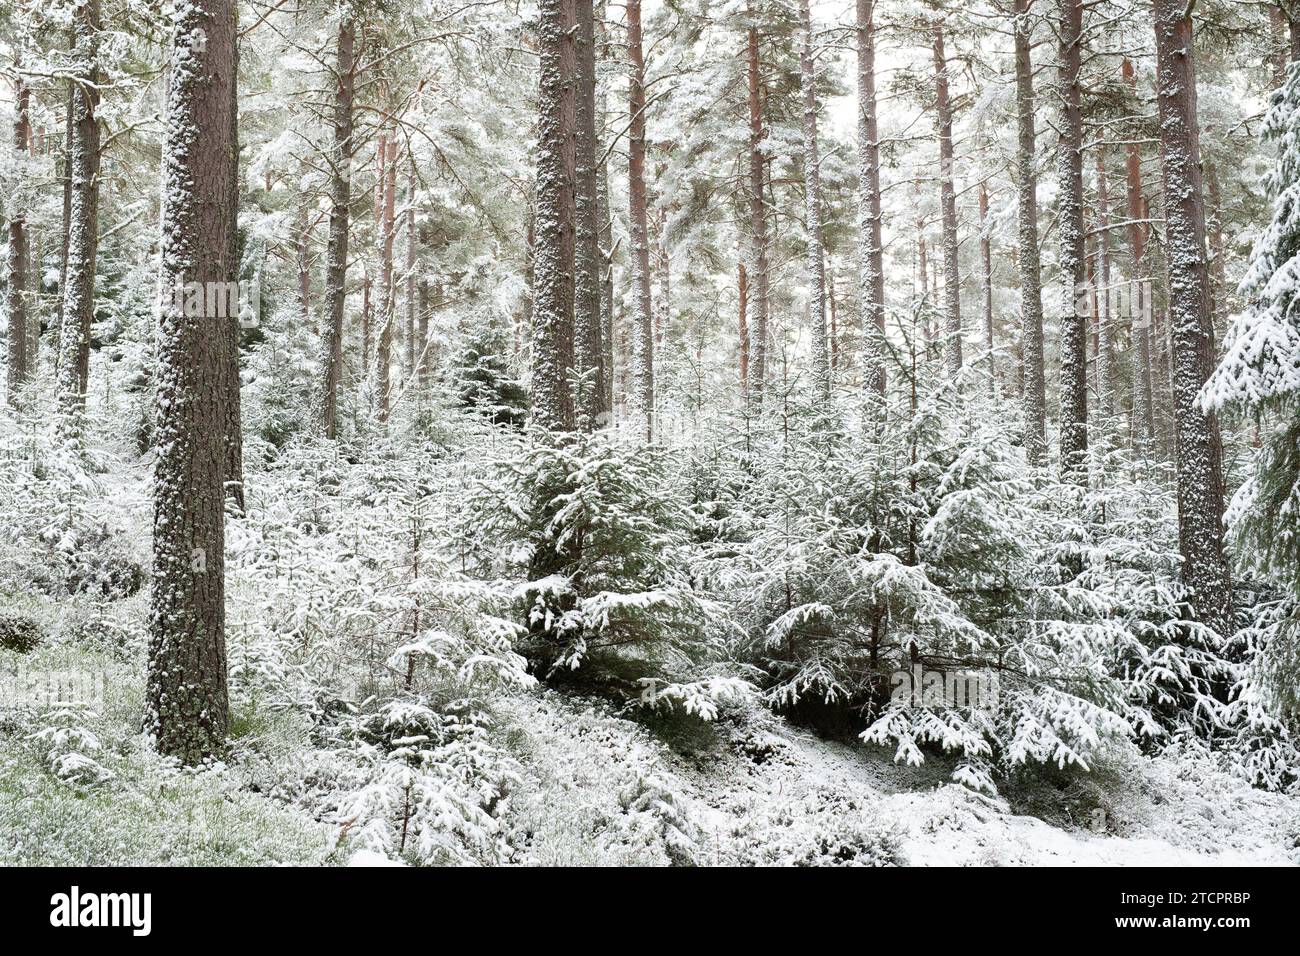 Snow covered pine trees in a scots pine wood. Speyside, Highlands, Scotland Stock Photo